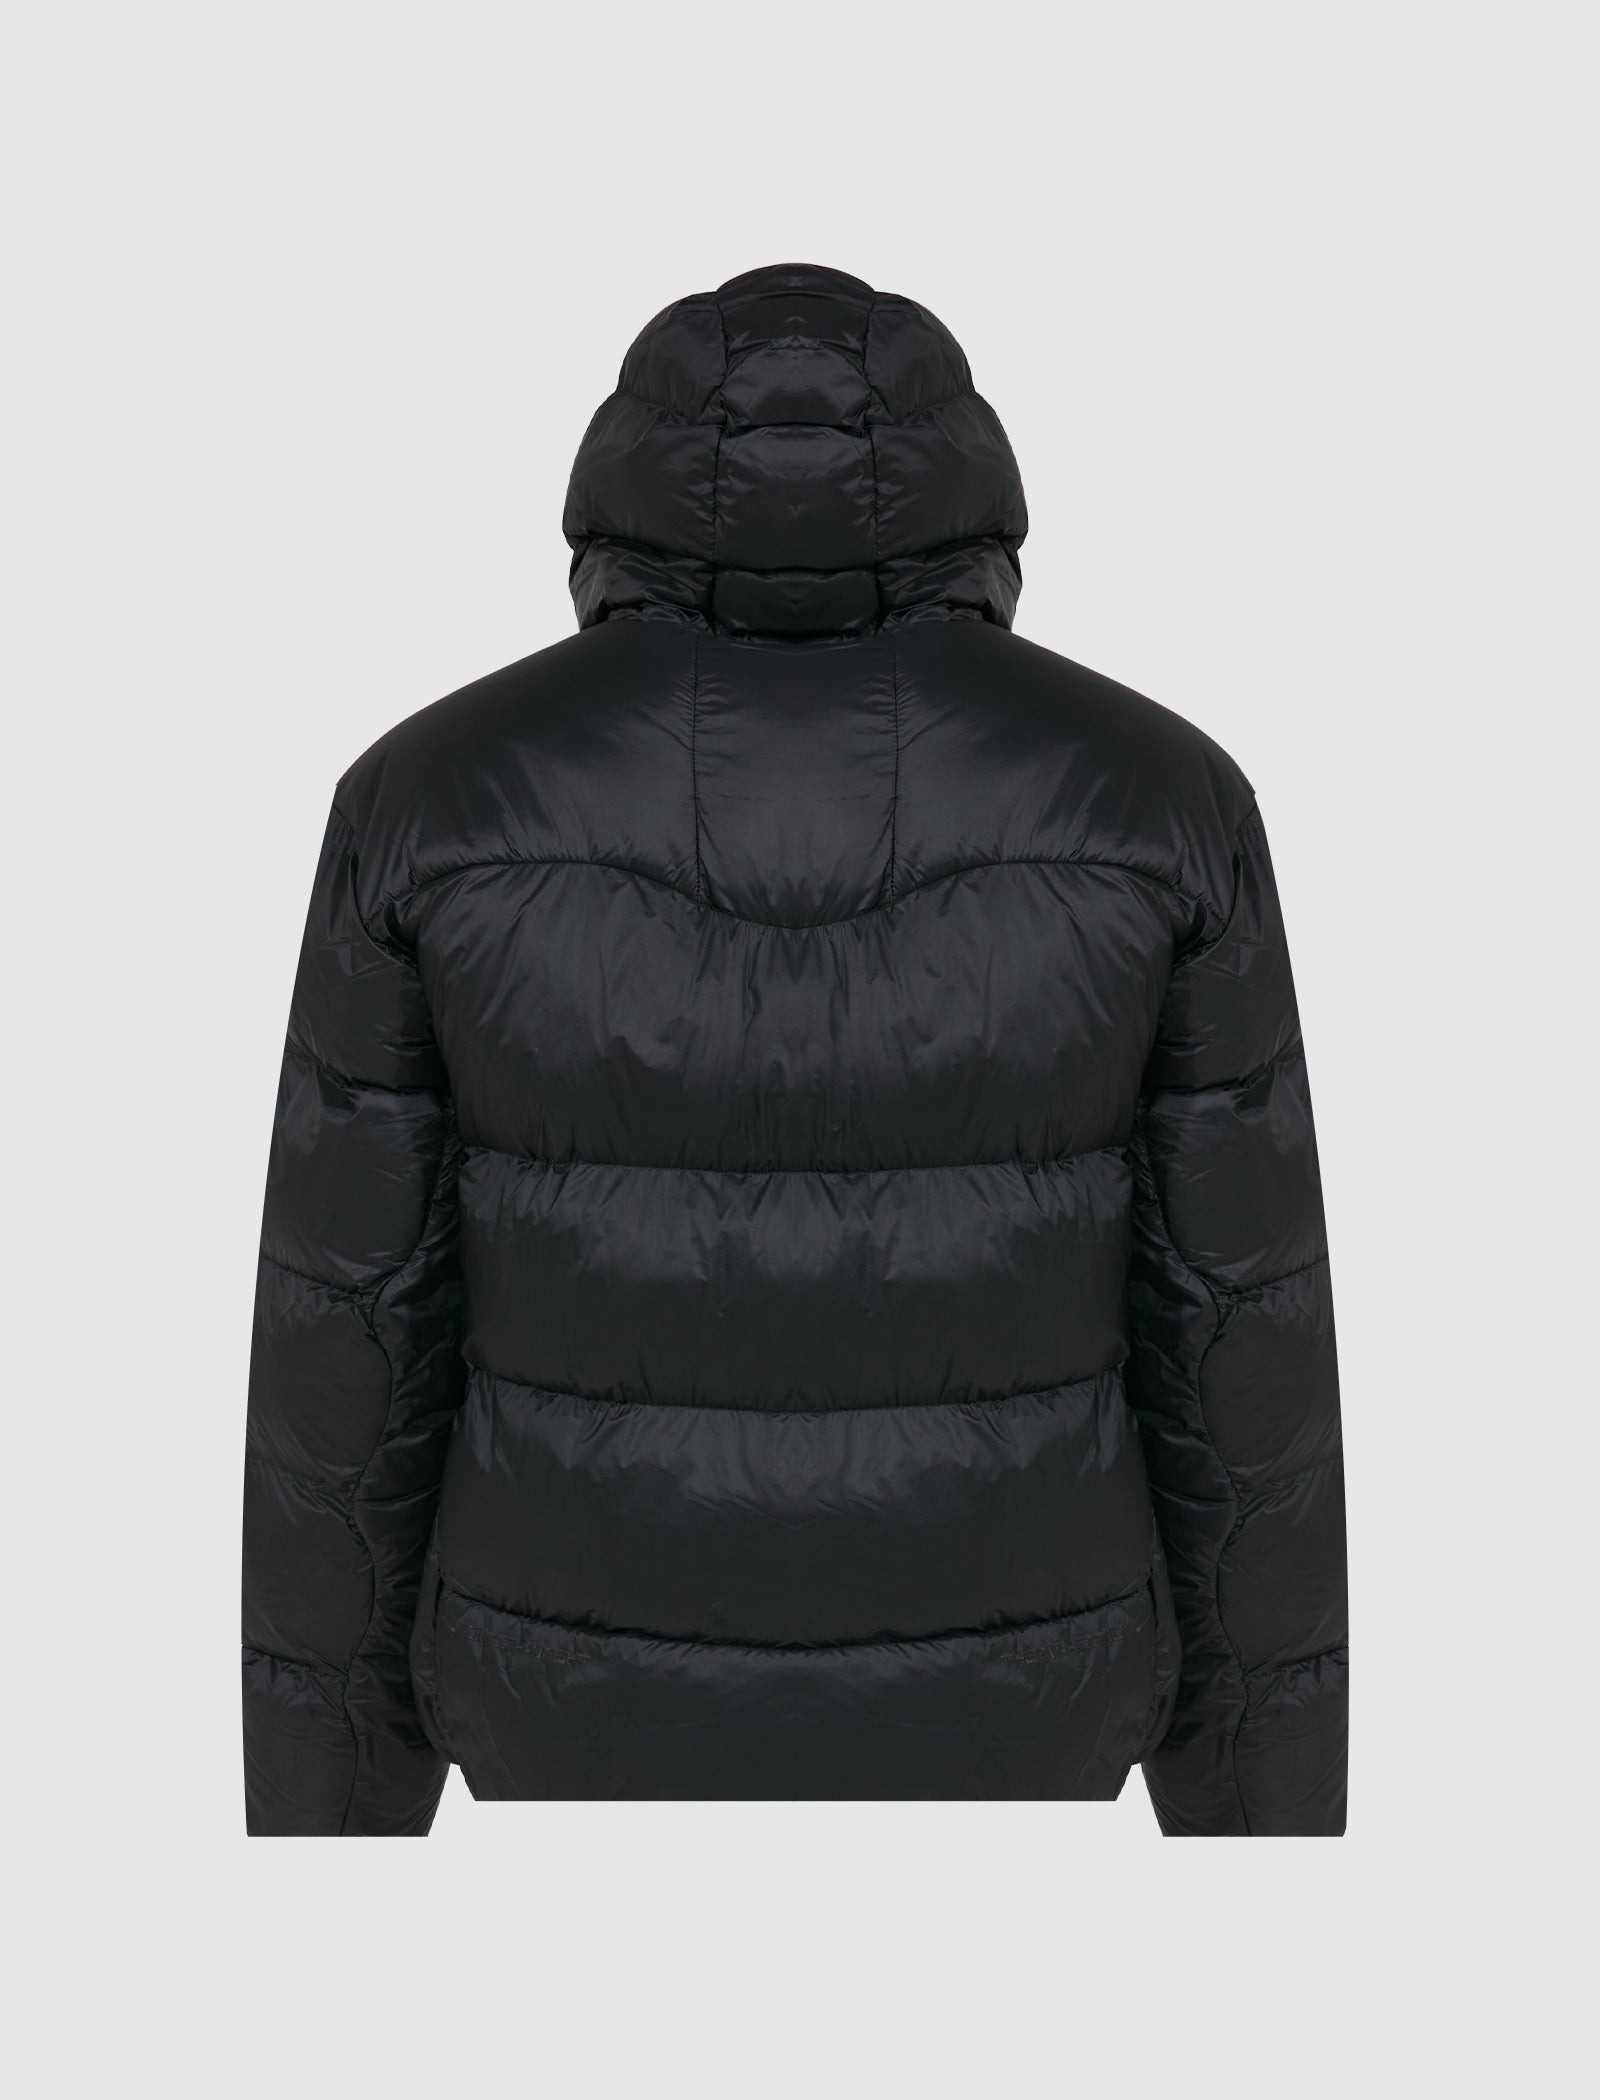 NIKE THERMA-FIT ADV ACG JACKET